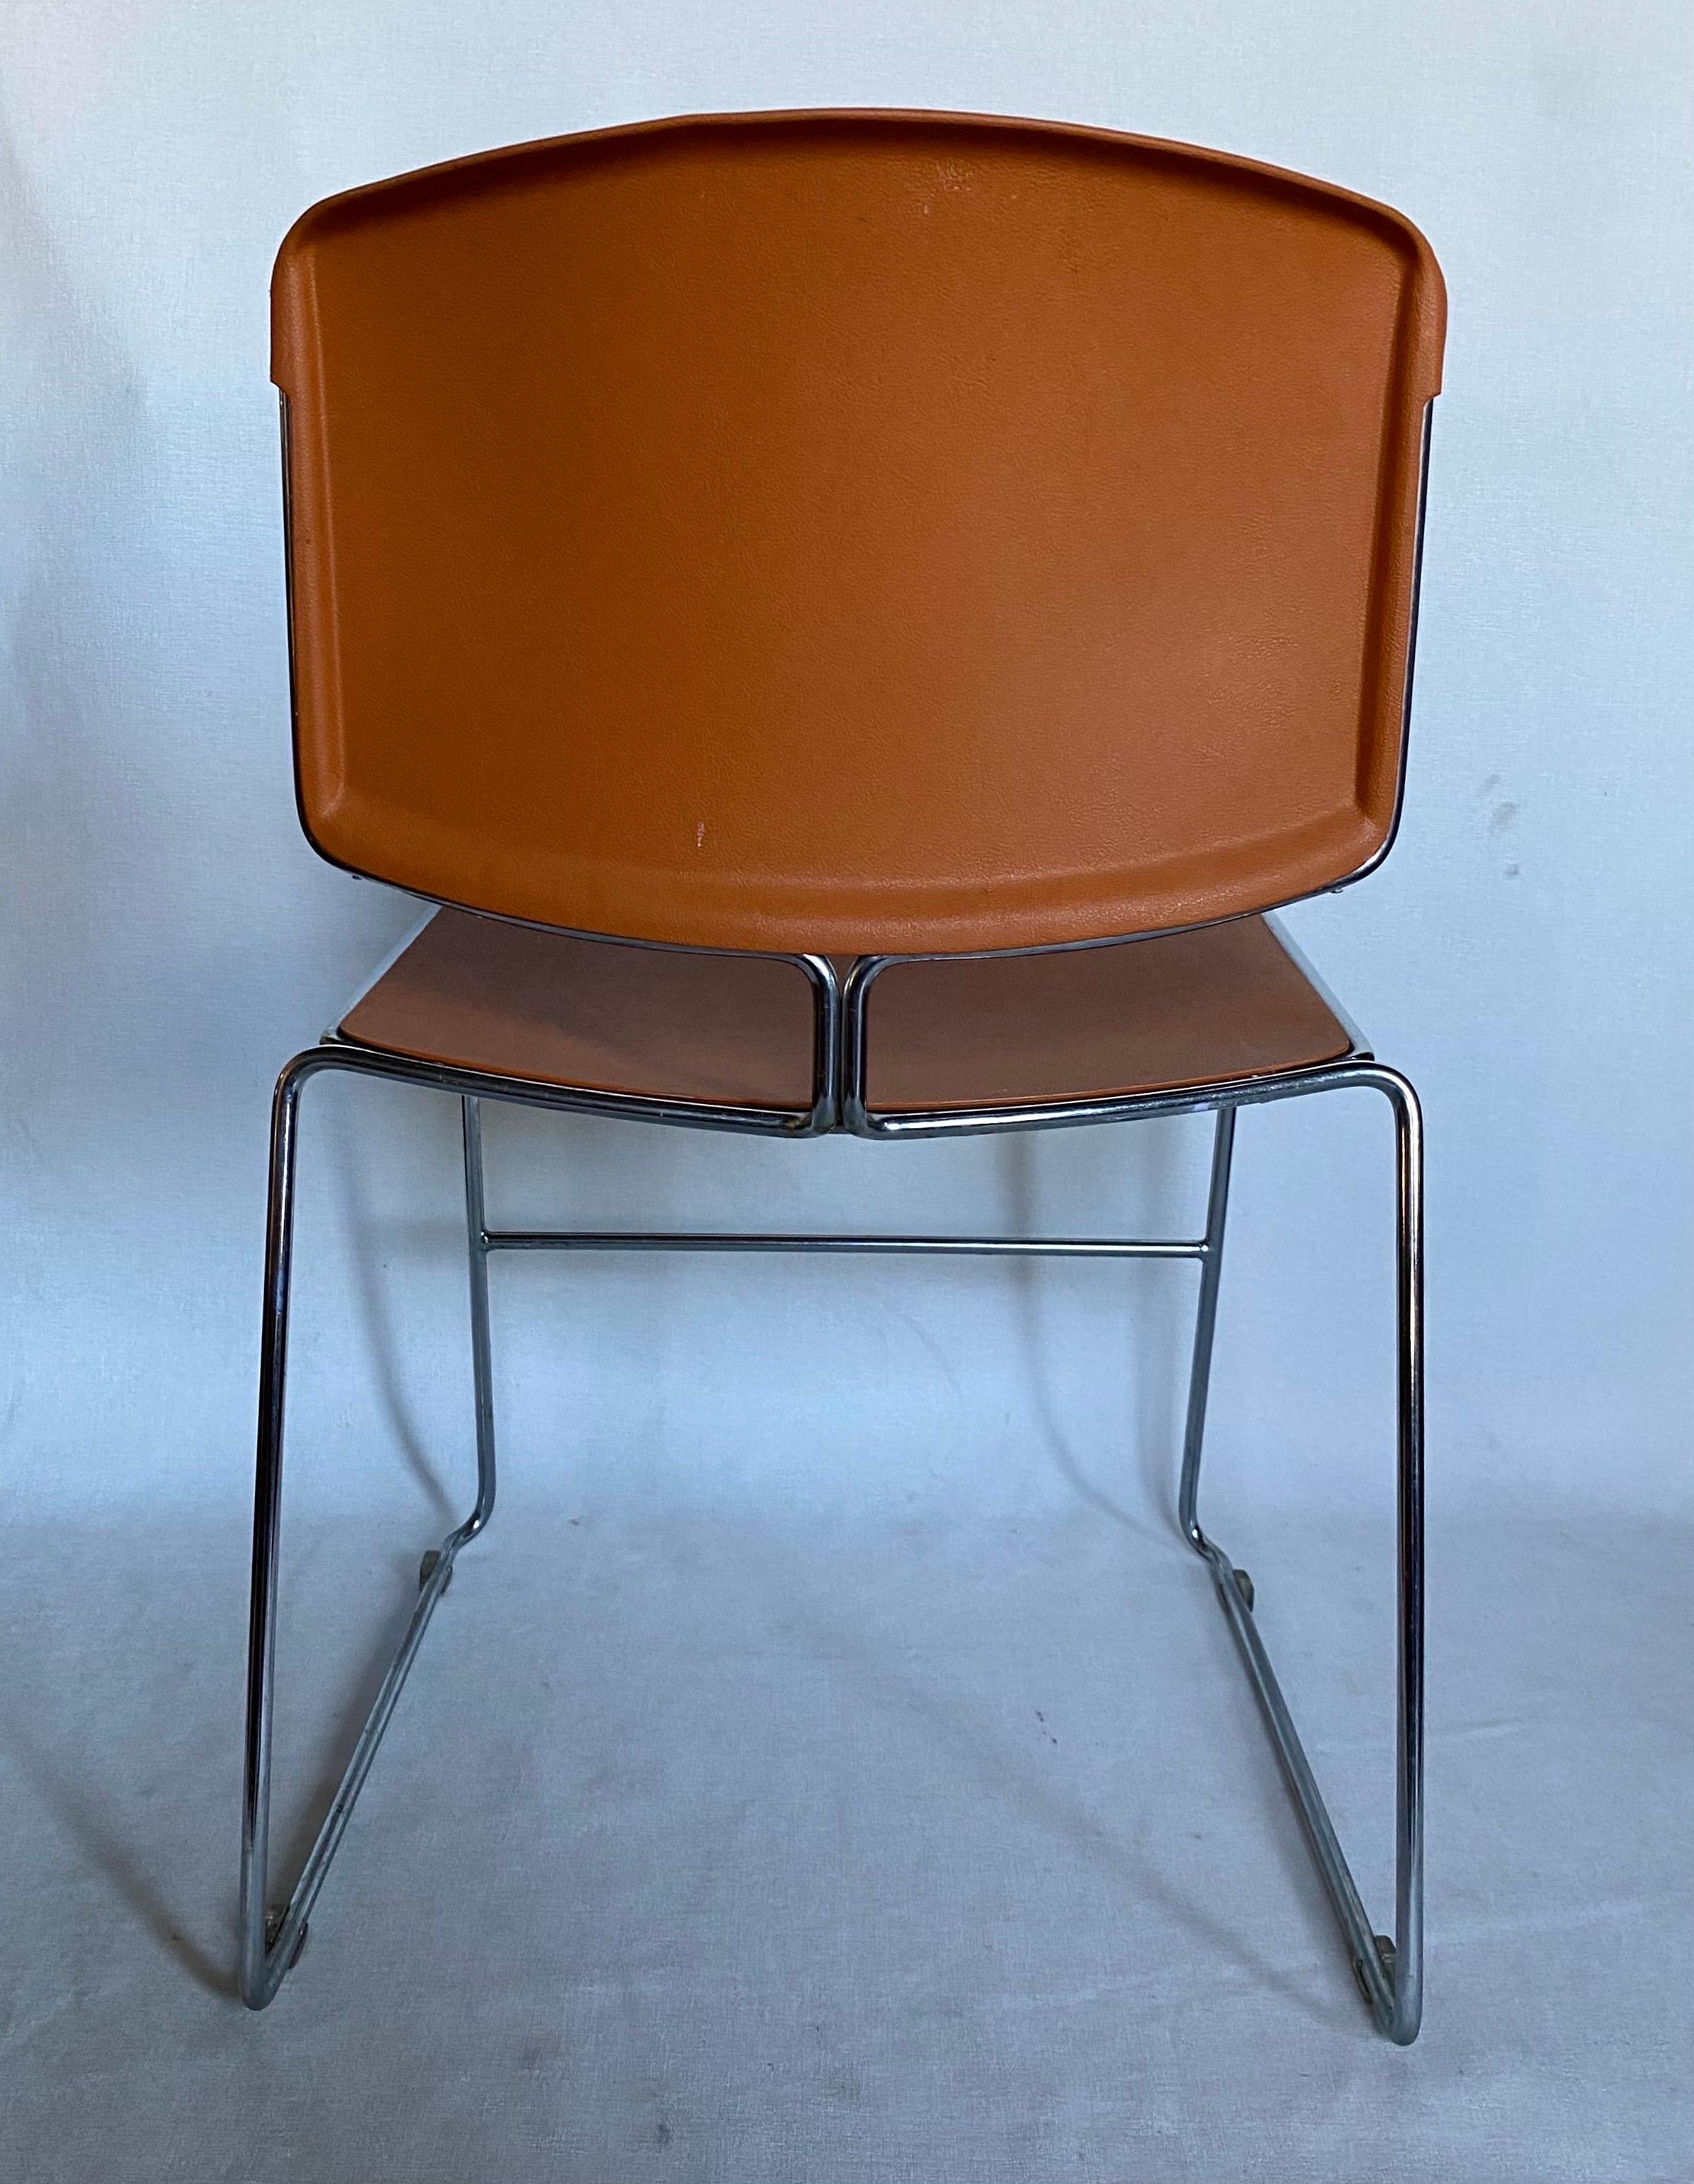 Molded Mid-Century Modern Max Stacker Conference Office Chairs by Steelcase, 1970s For Sale